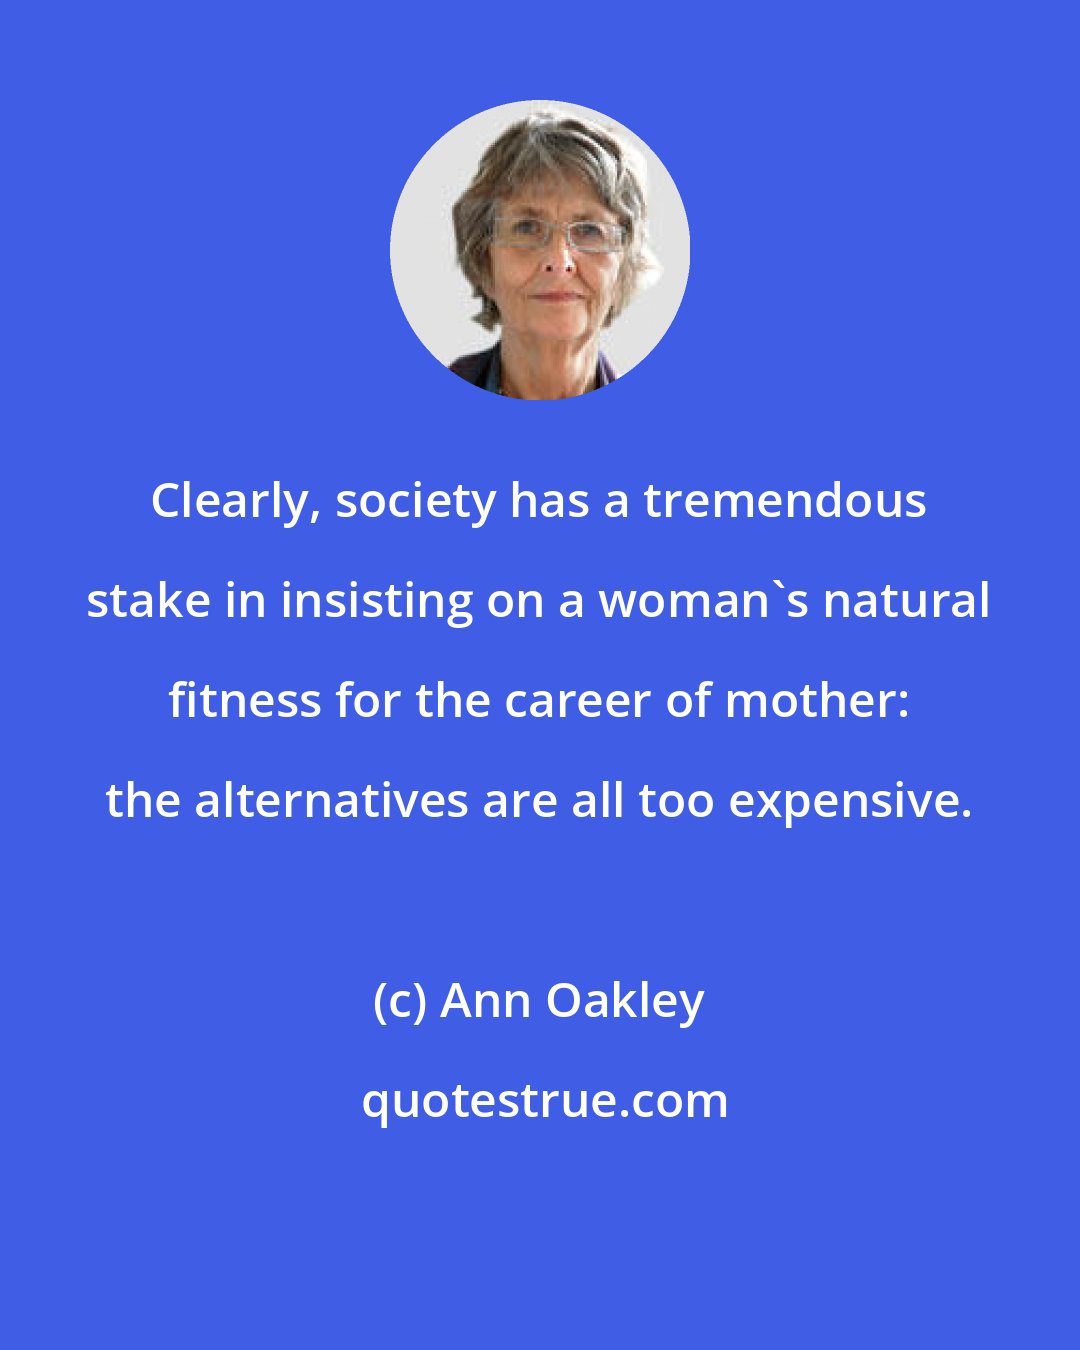 Ann Oakley: Clearly, society has a tremendous stake in insisting on a woman's natural fitness for the career of mother: the alternatives are all too expensive.